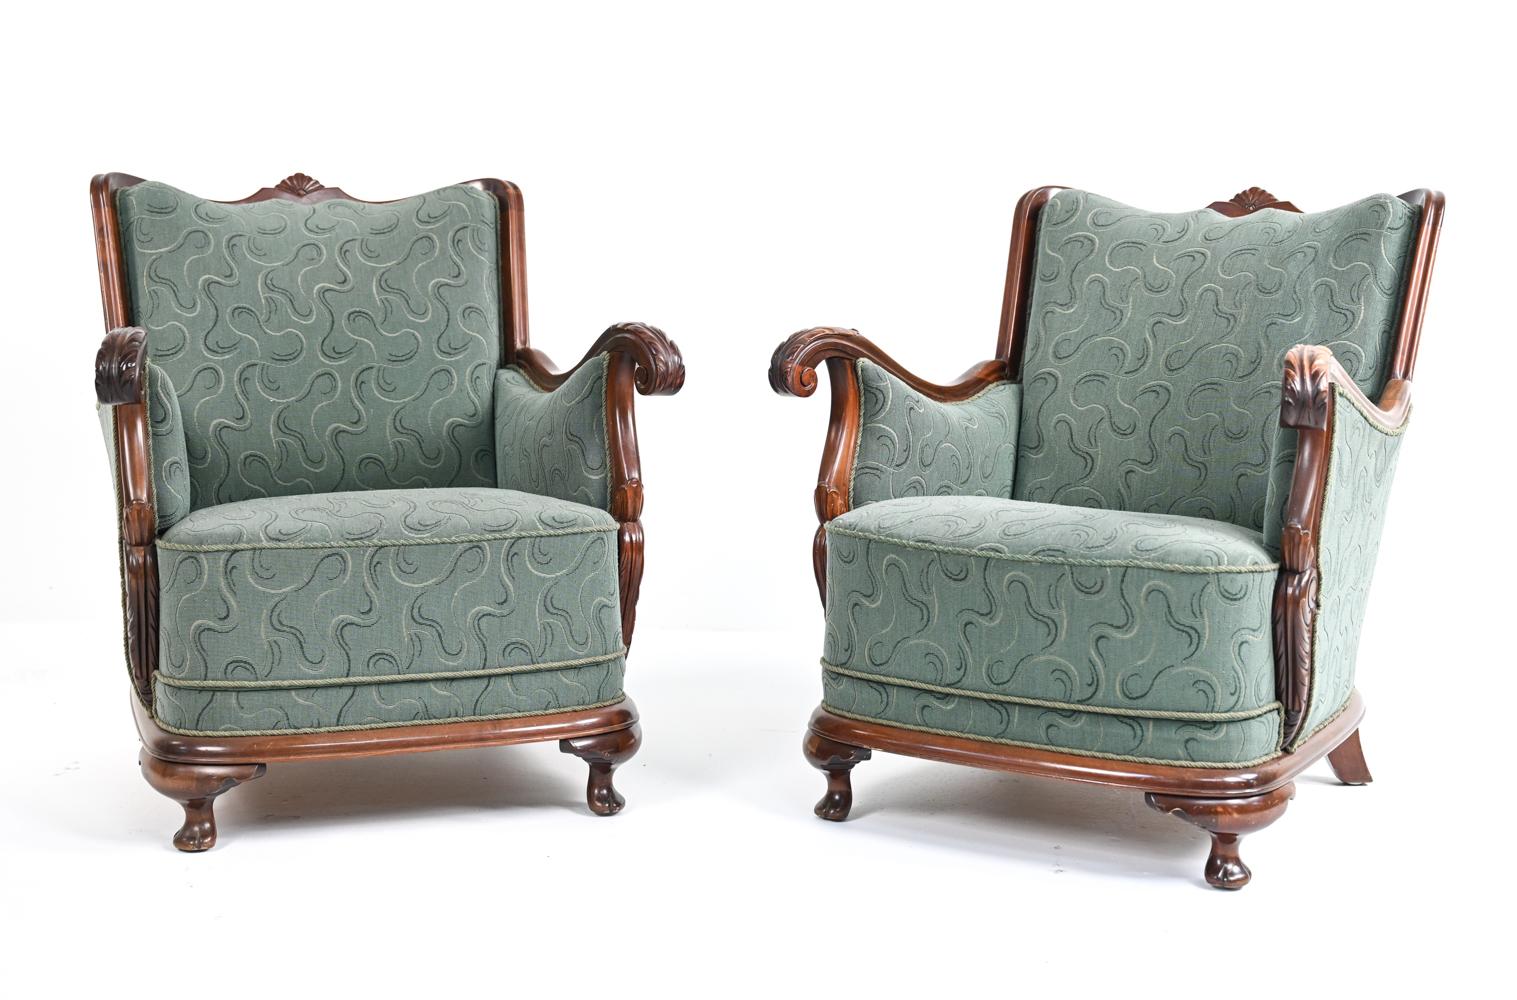 Unusual pair of Scandinavian bergere-form club chairs with solid carved wood frames, overstuffed sprung seats, and period sculpted bouclette upholstery. Early 20th century, possibly 1920's.